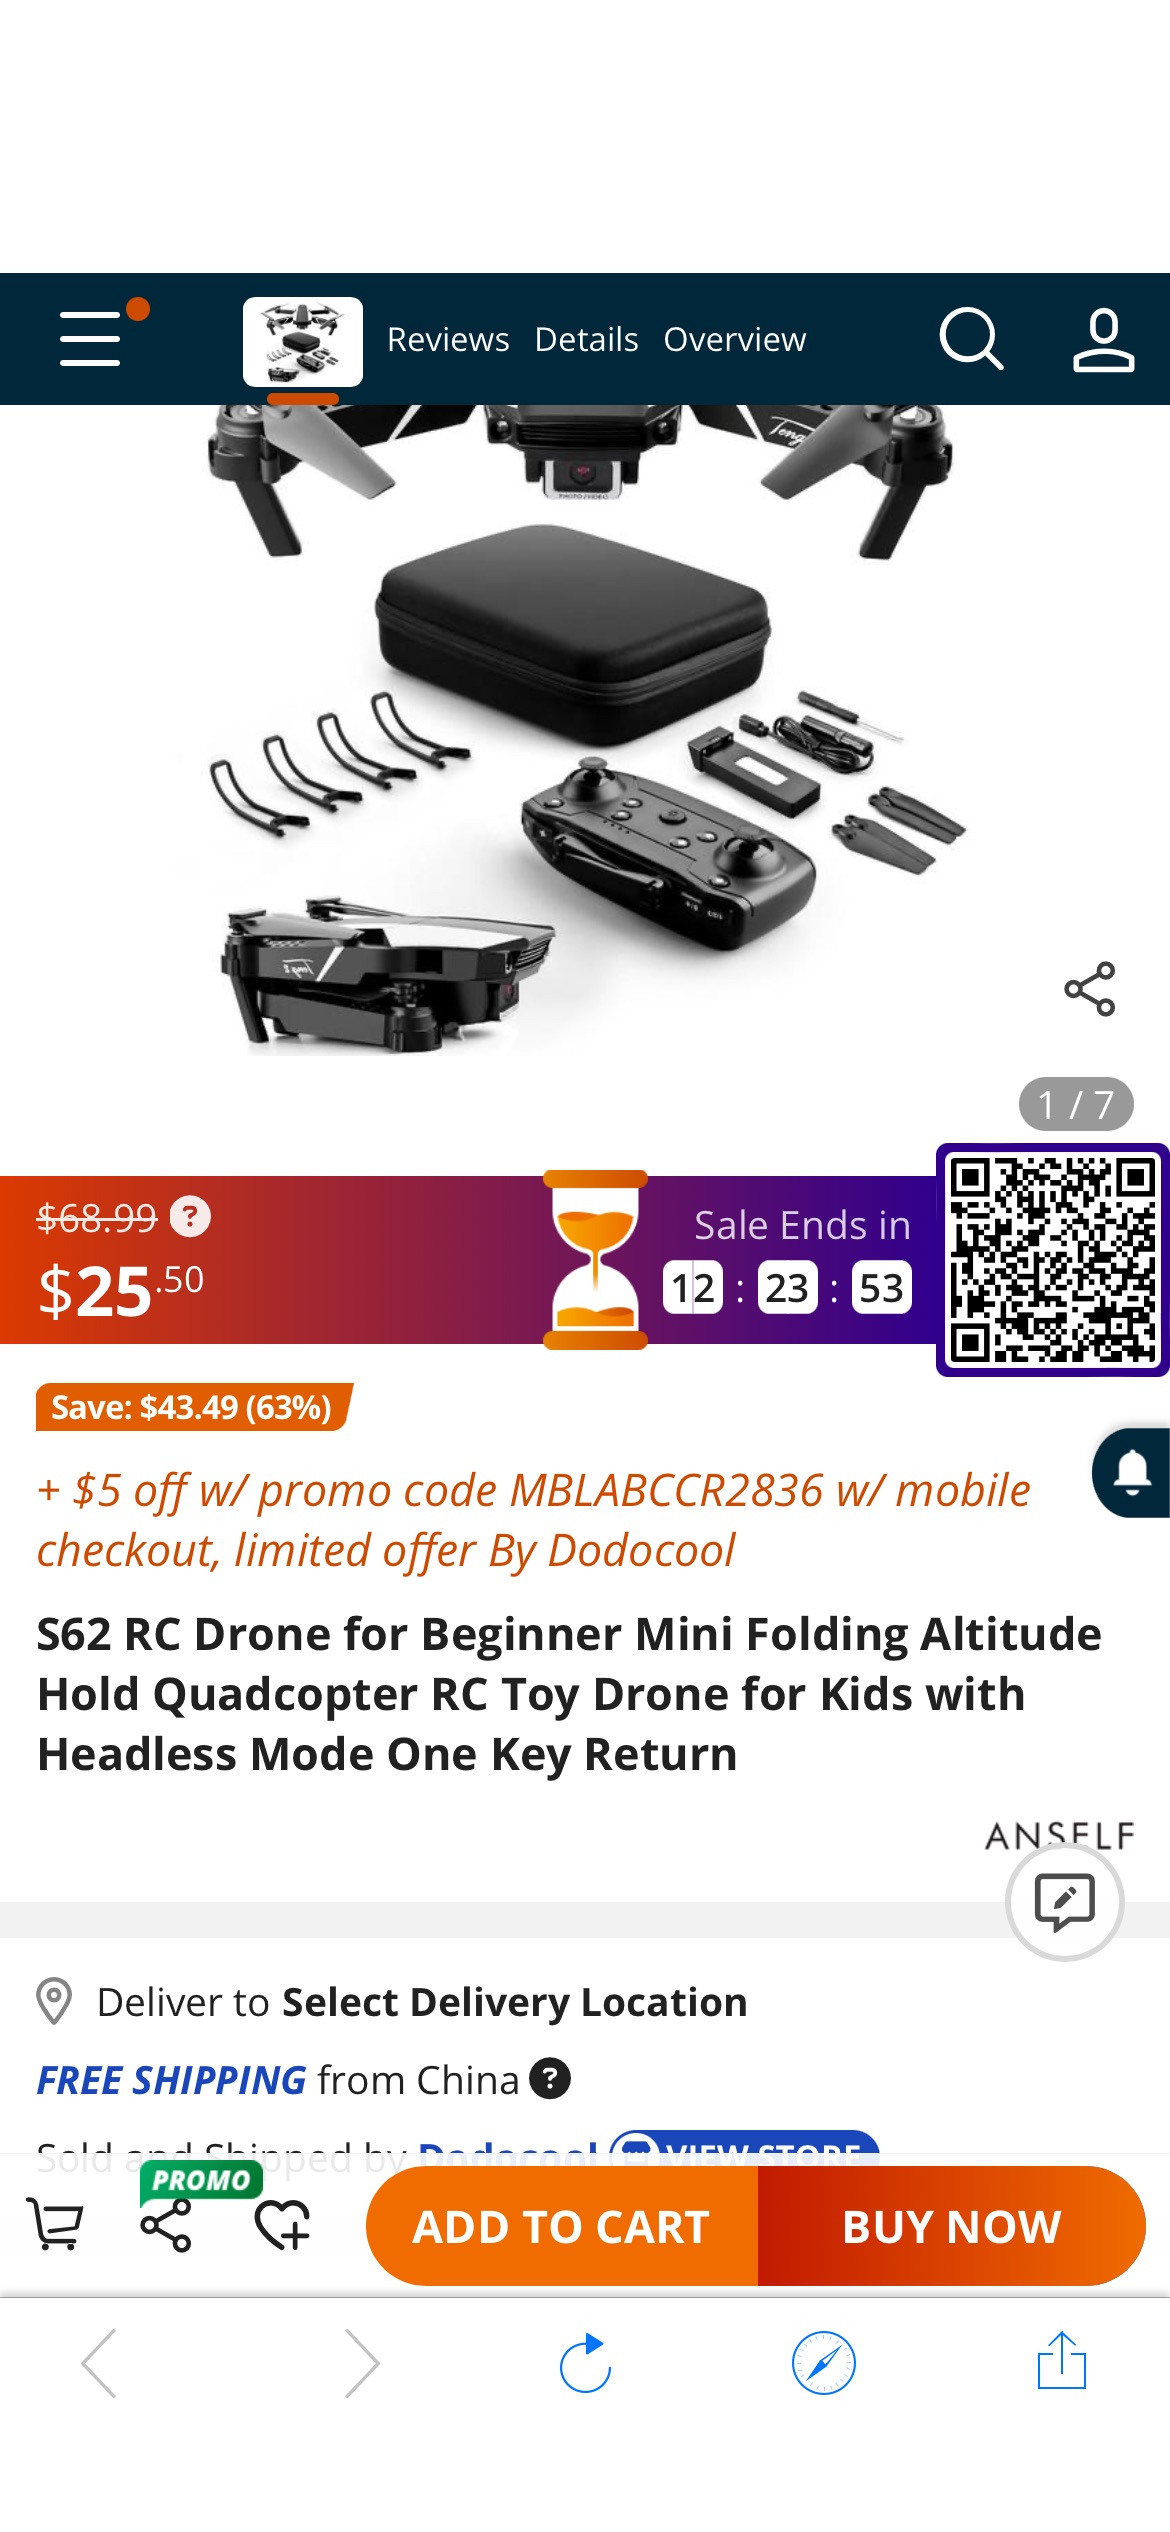 S62 RC Drone for Beginner Mini Folding Altitude Hold Quadcopter RC Toy Drone for Kids with Headless Mode One Key Return Drones - Newegg.com